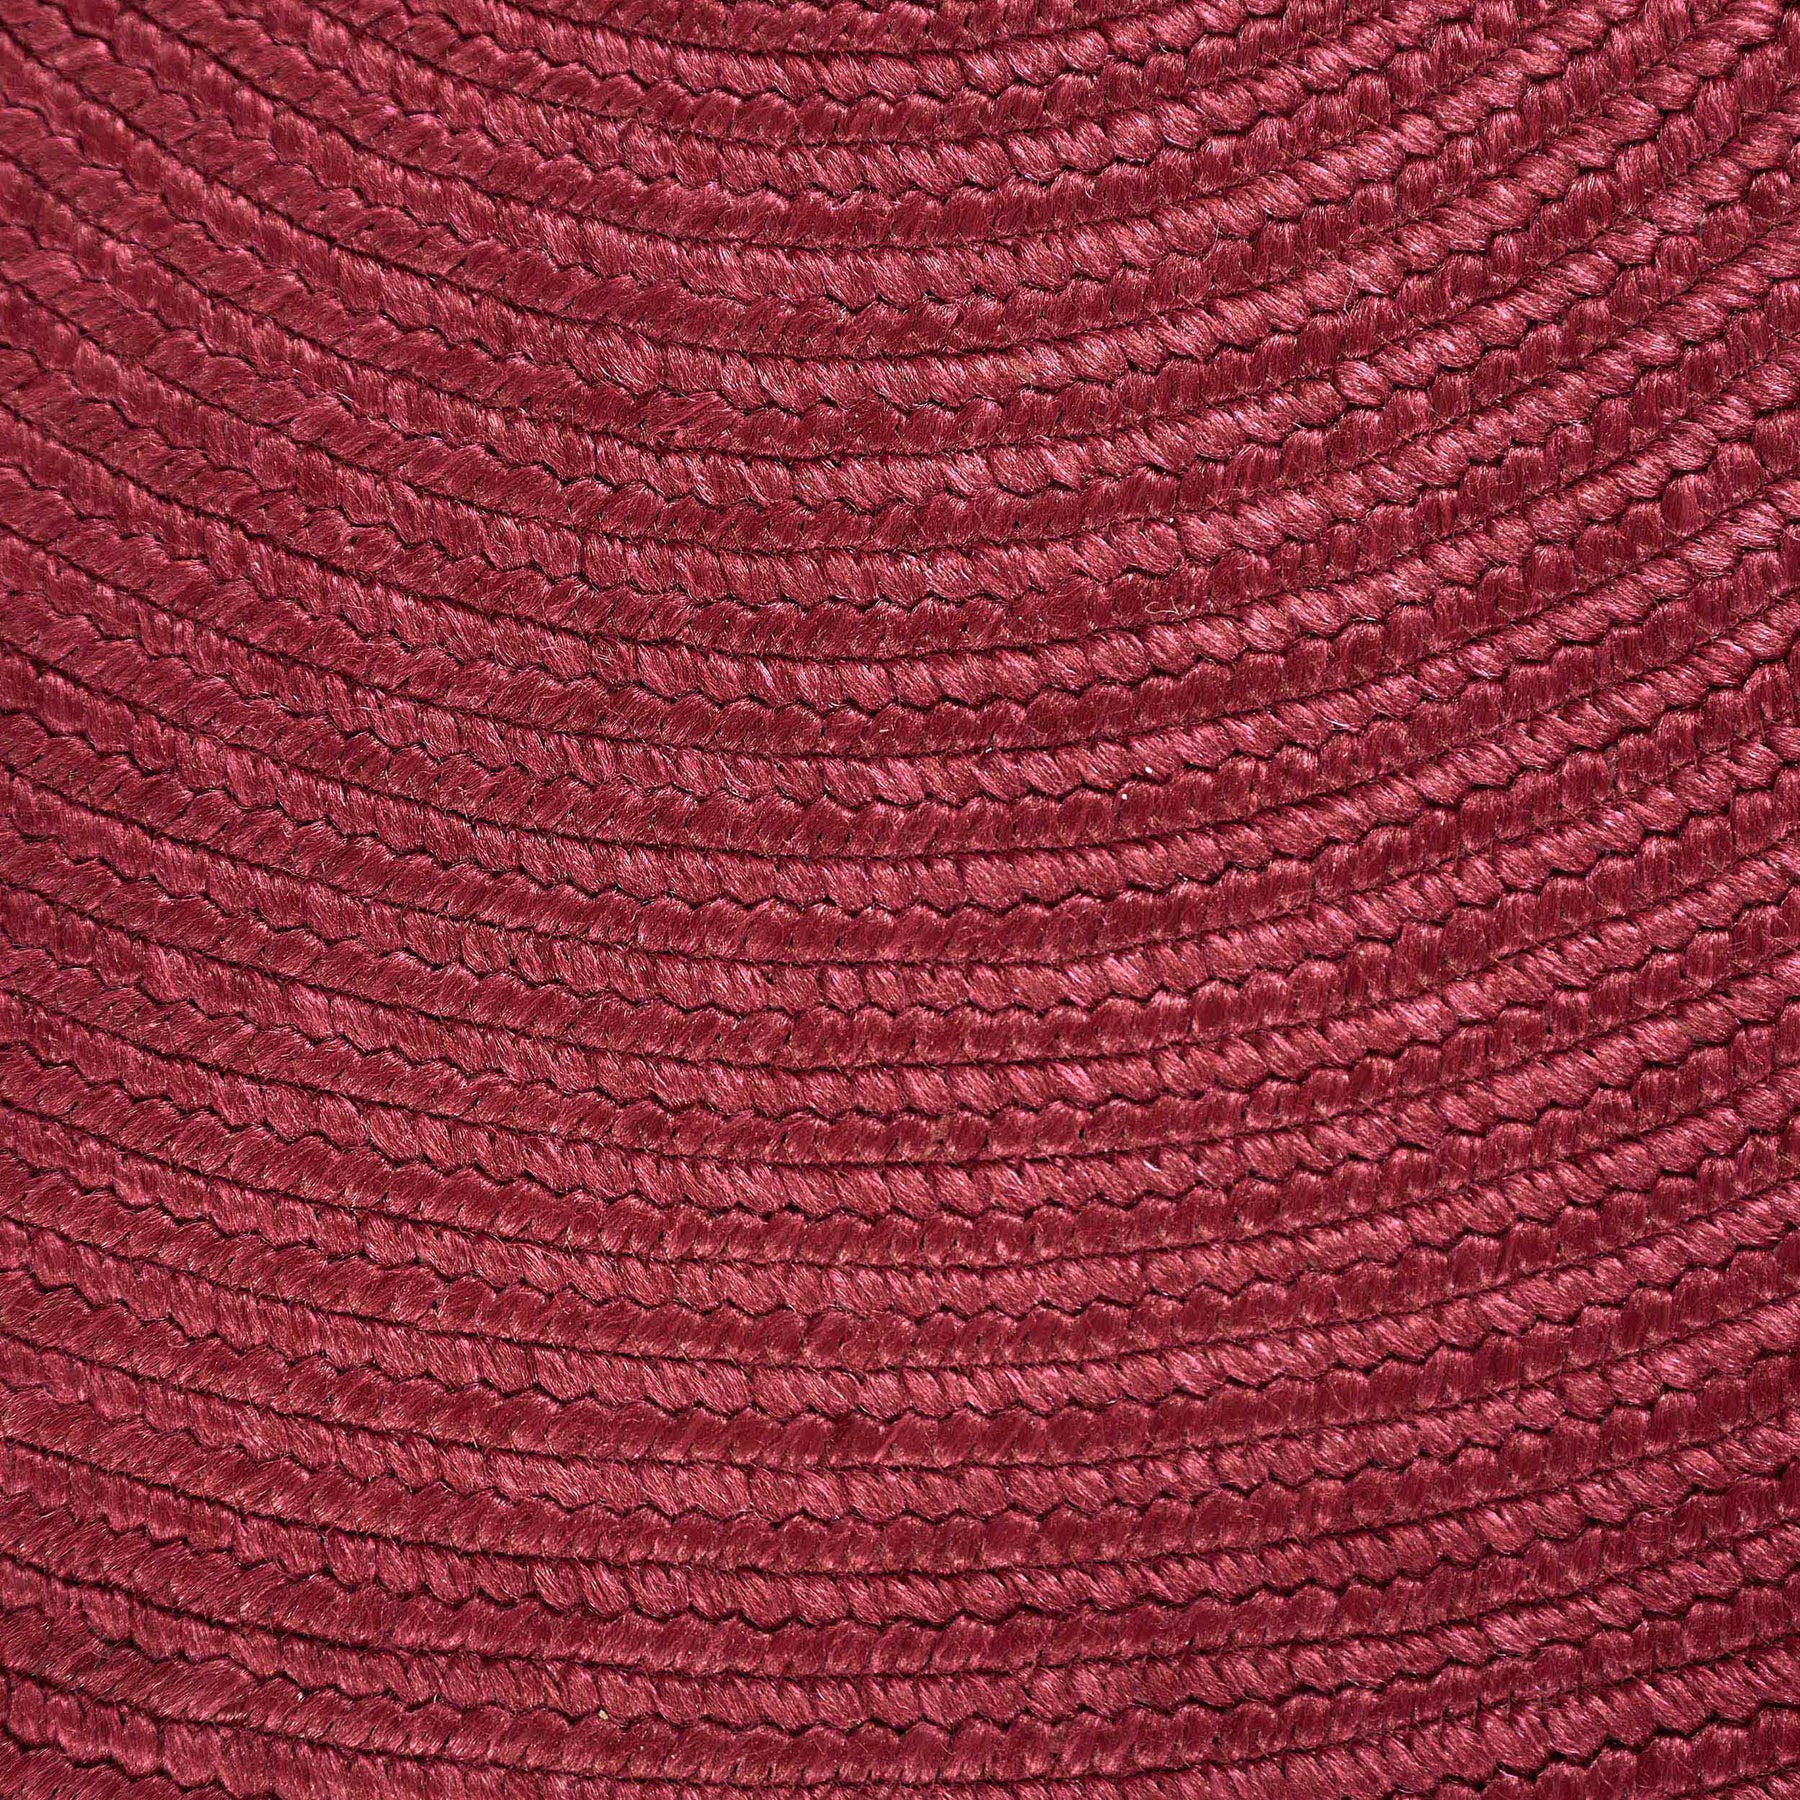 Classic Braided Weave Oval Area Rug Indoor Outdoor Rugs - Burgundy